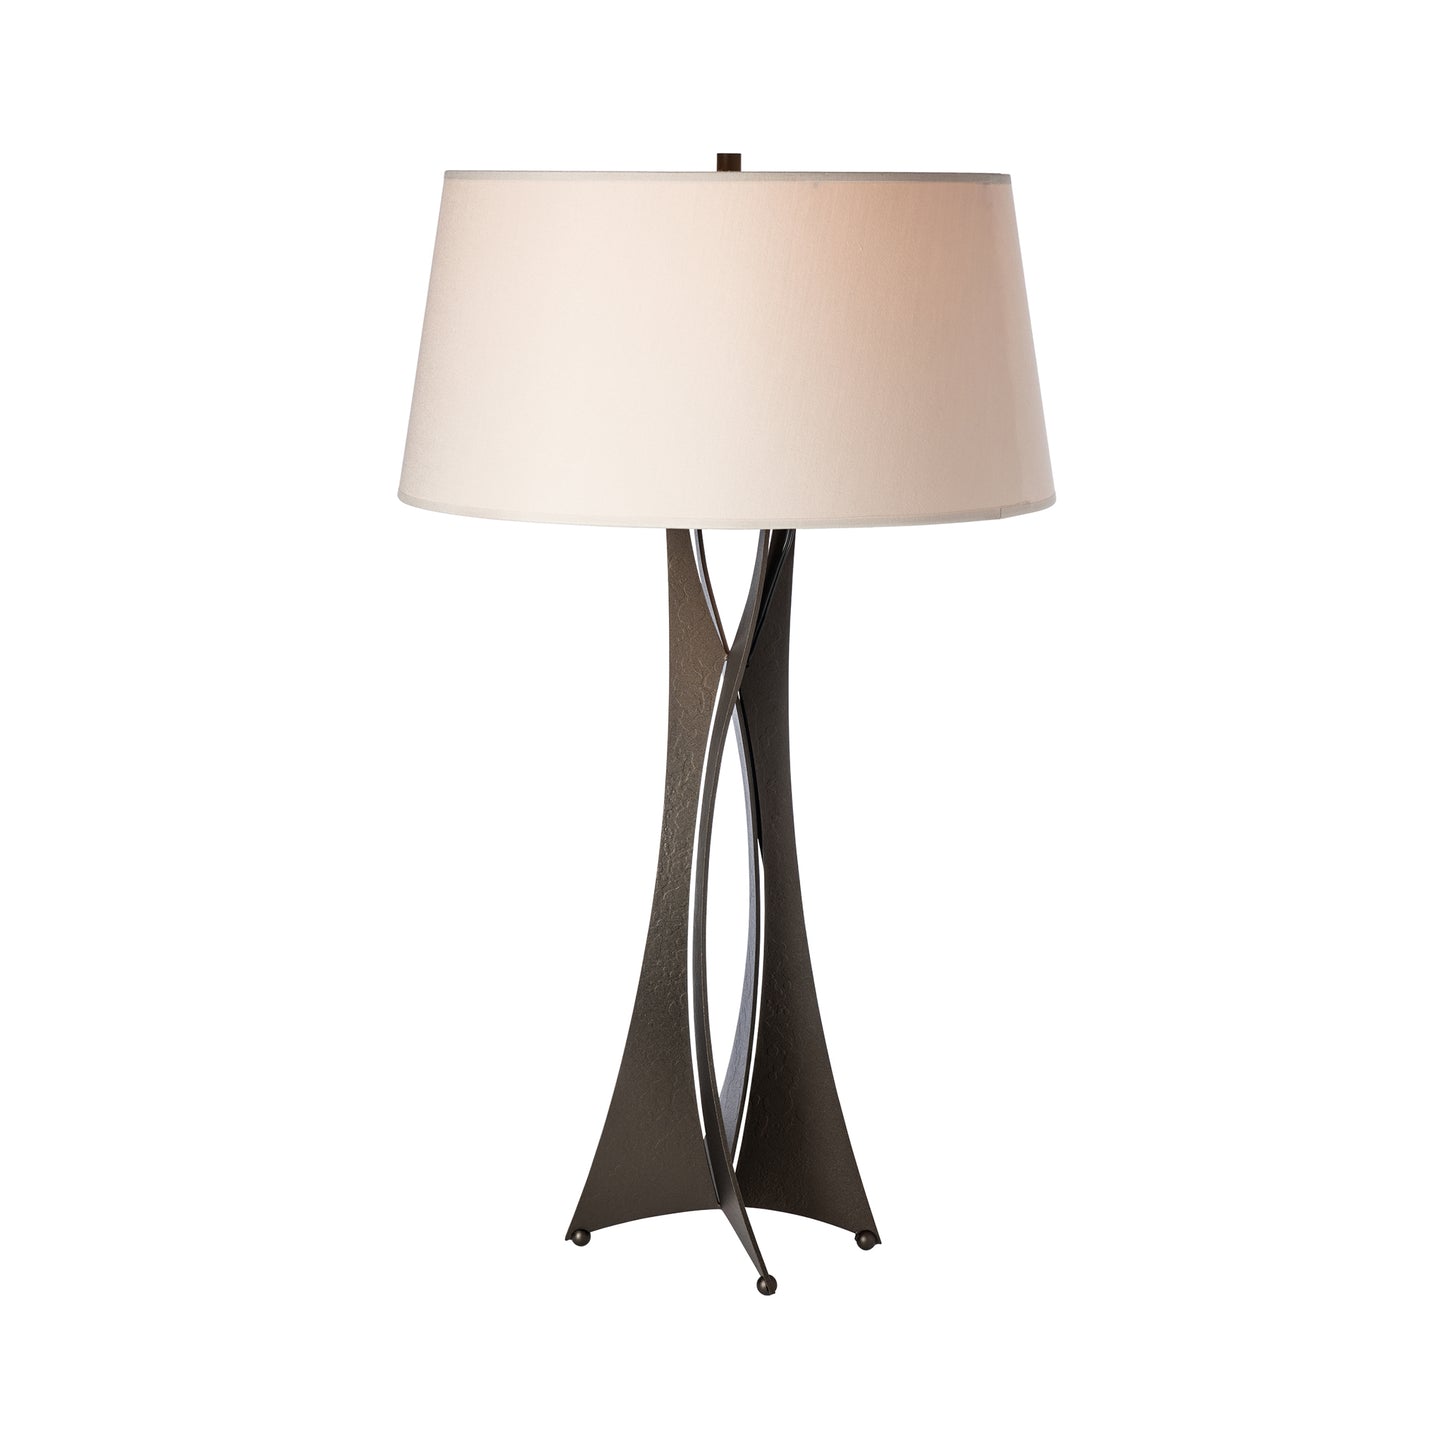 A Hubbardton Forge Moreau Table Lamp with a metal base and a white shade.